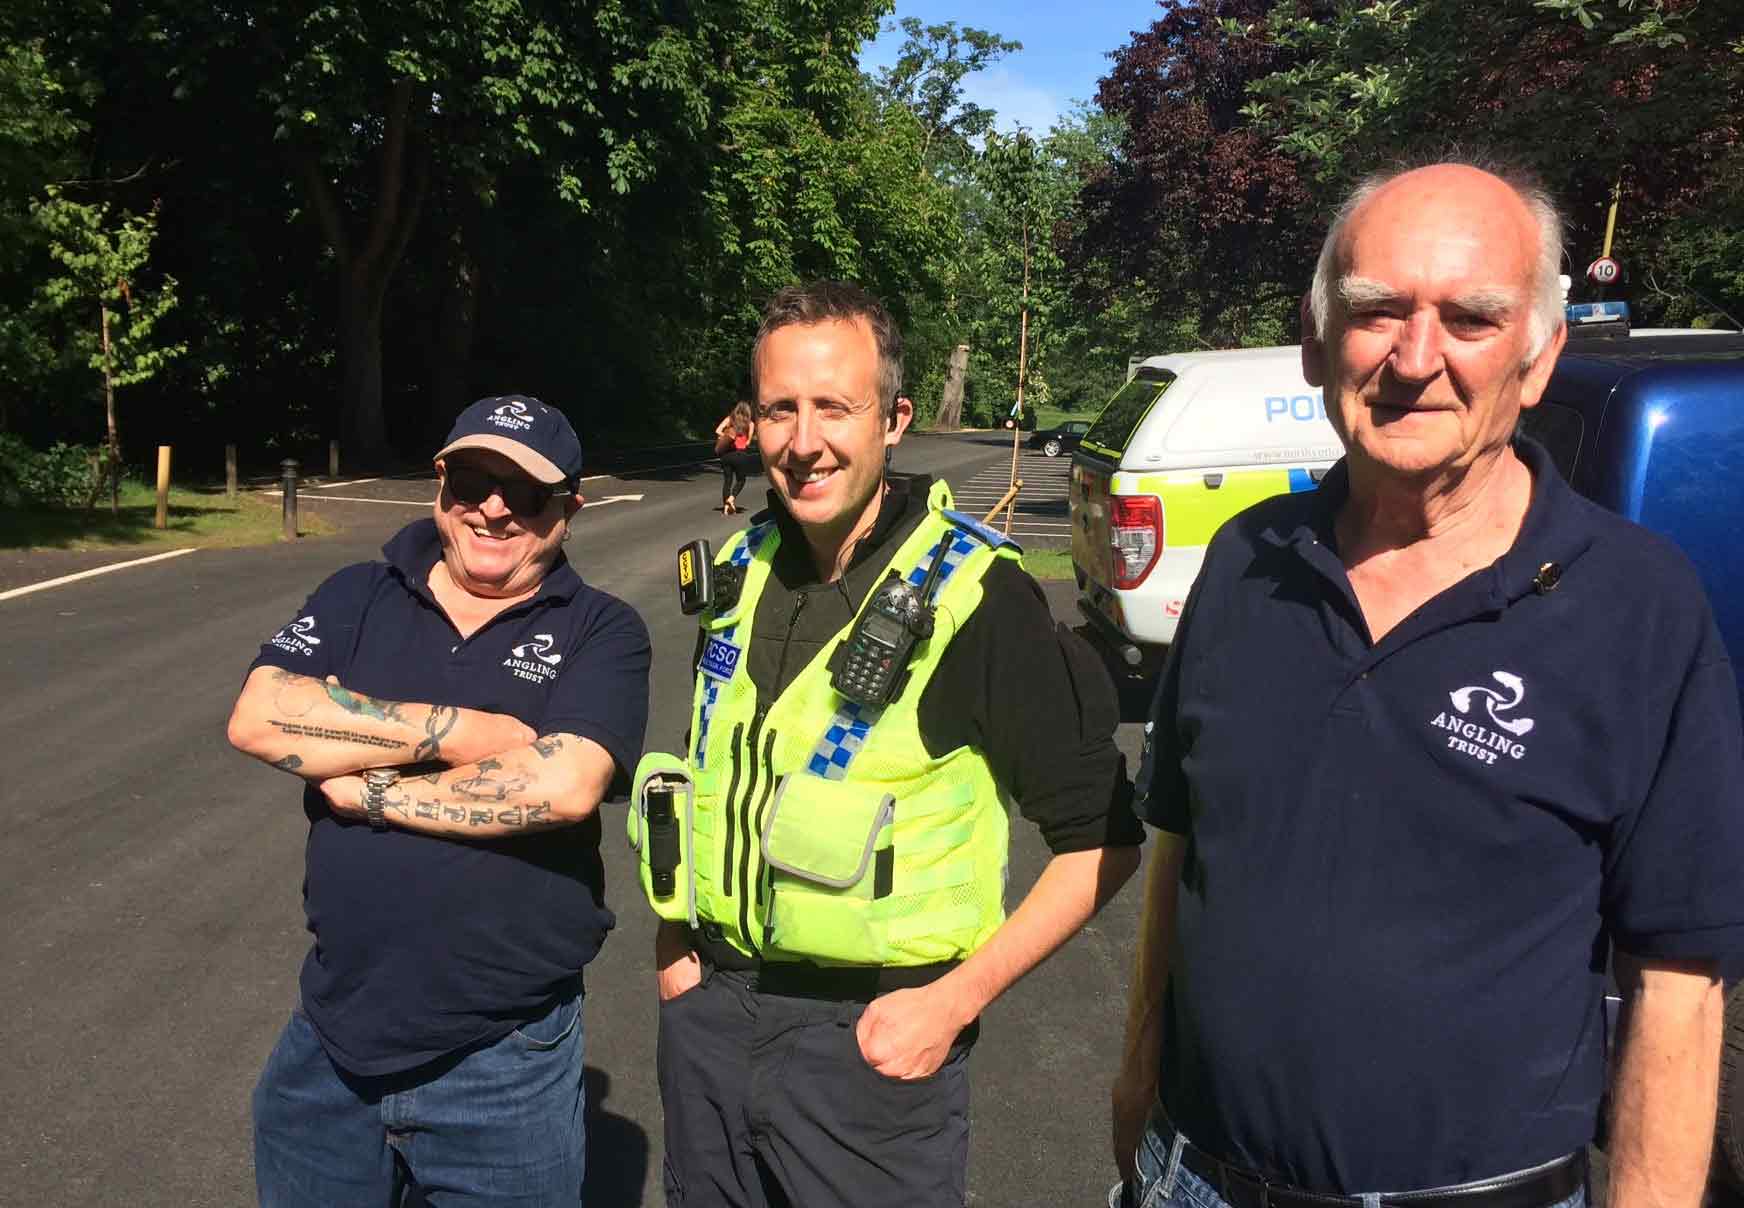 PCSO Matthew Cockerill of the North Yorkshire Police Rural Taskforce with Angling Trust representatives in Harrogate